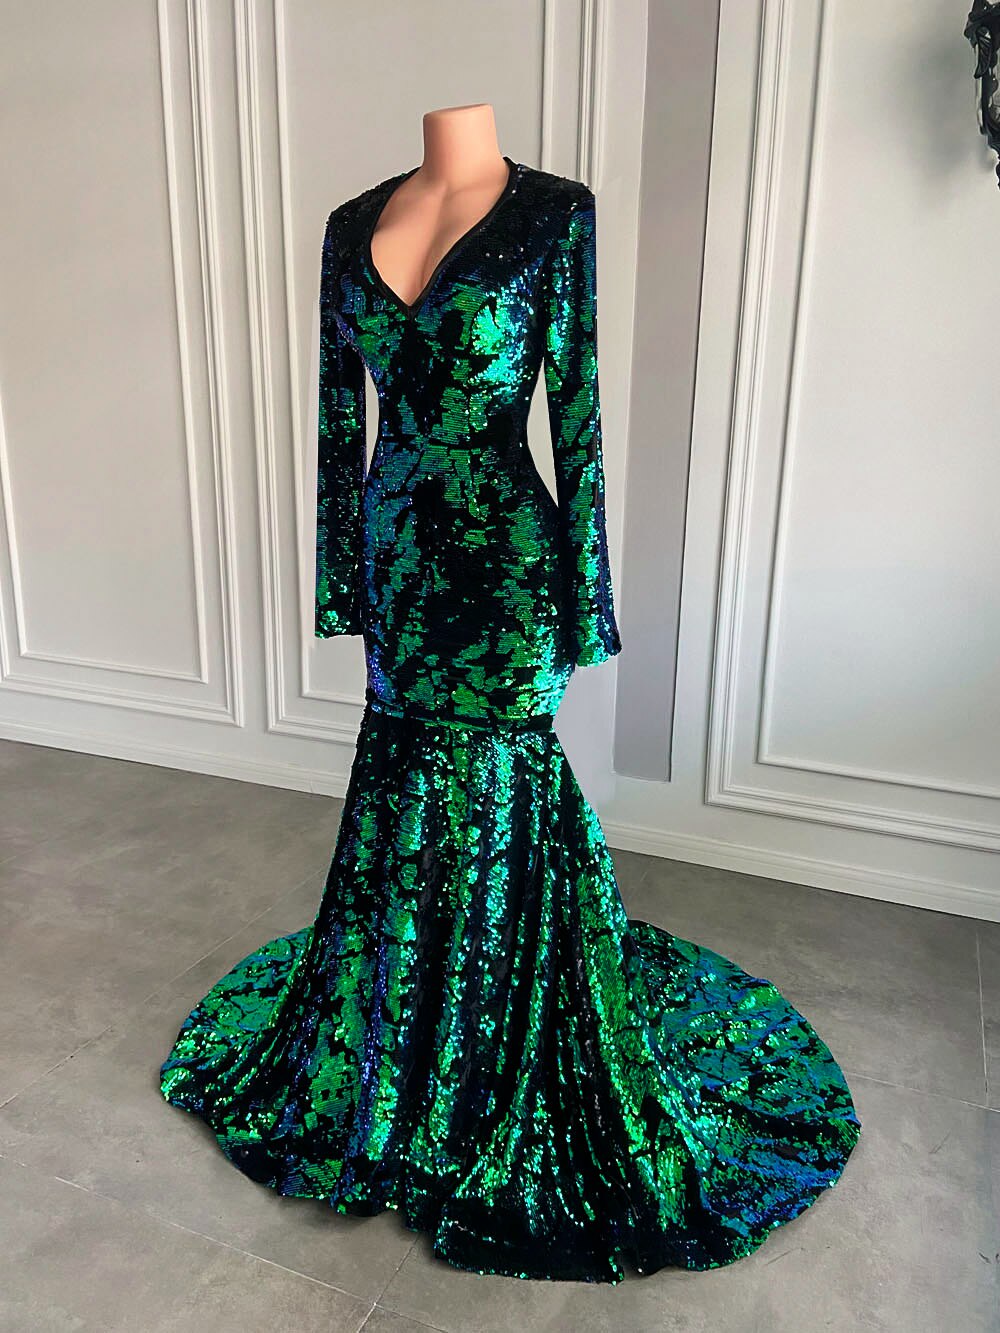 Mermaid Long Sleeve V-neck Sparkly Black and Green Prom Gowns